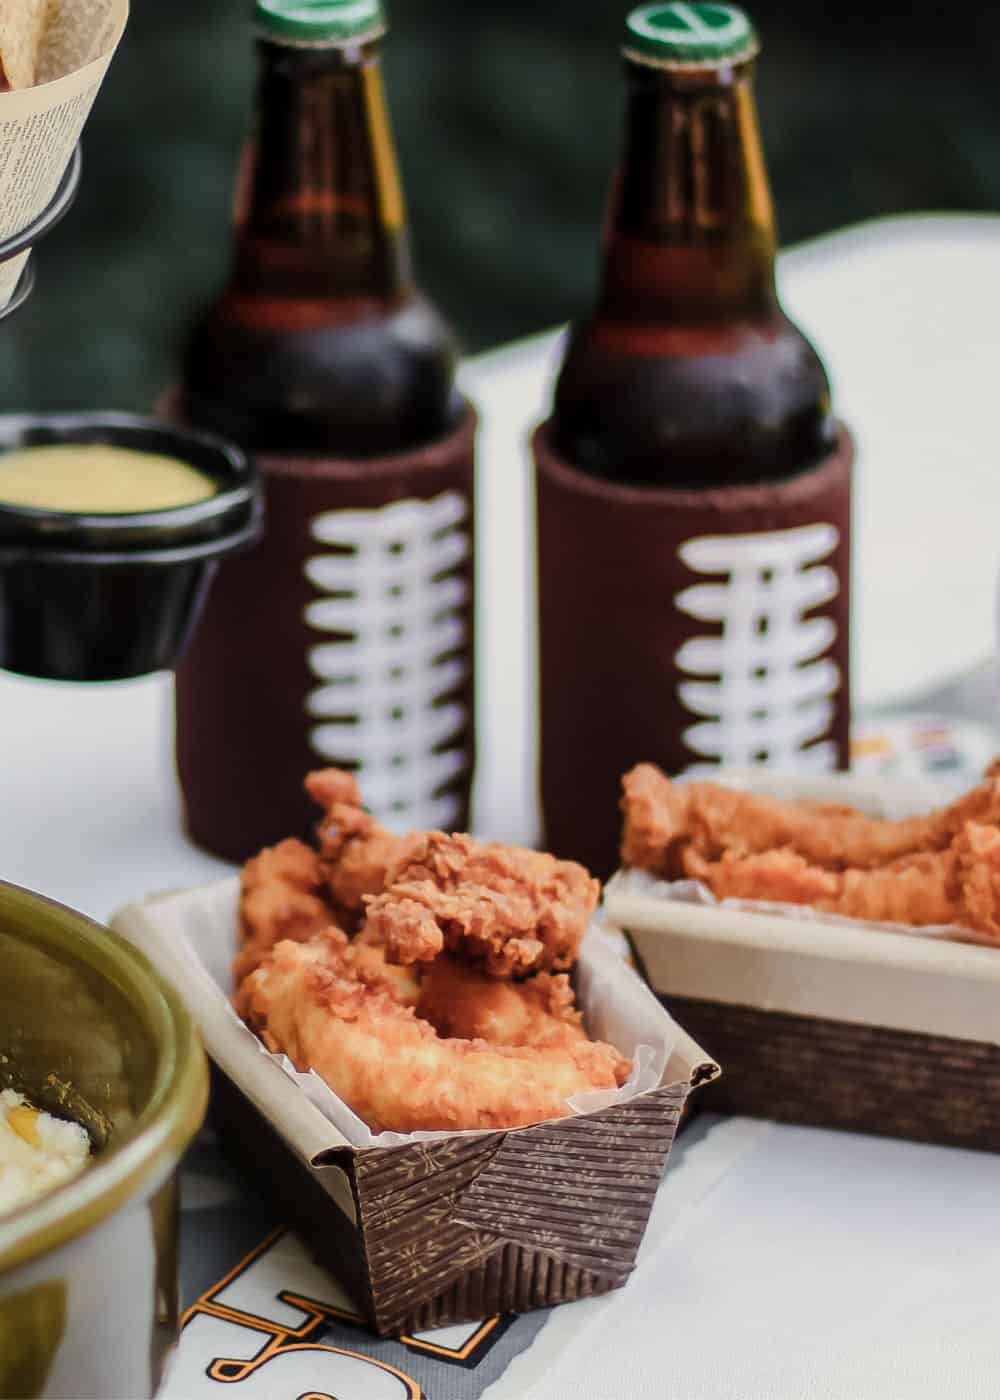 fried chicken fingers in disposable baskets with beer on outside table.